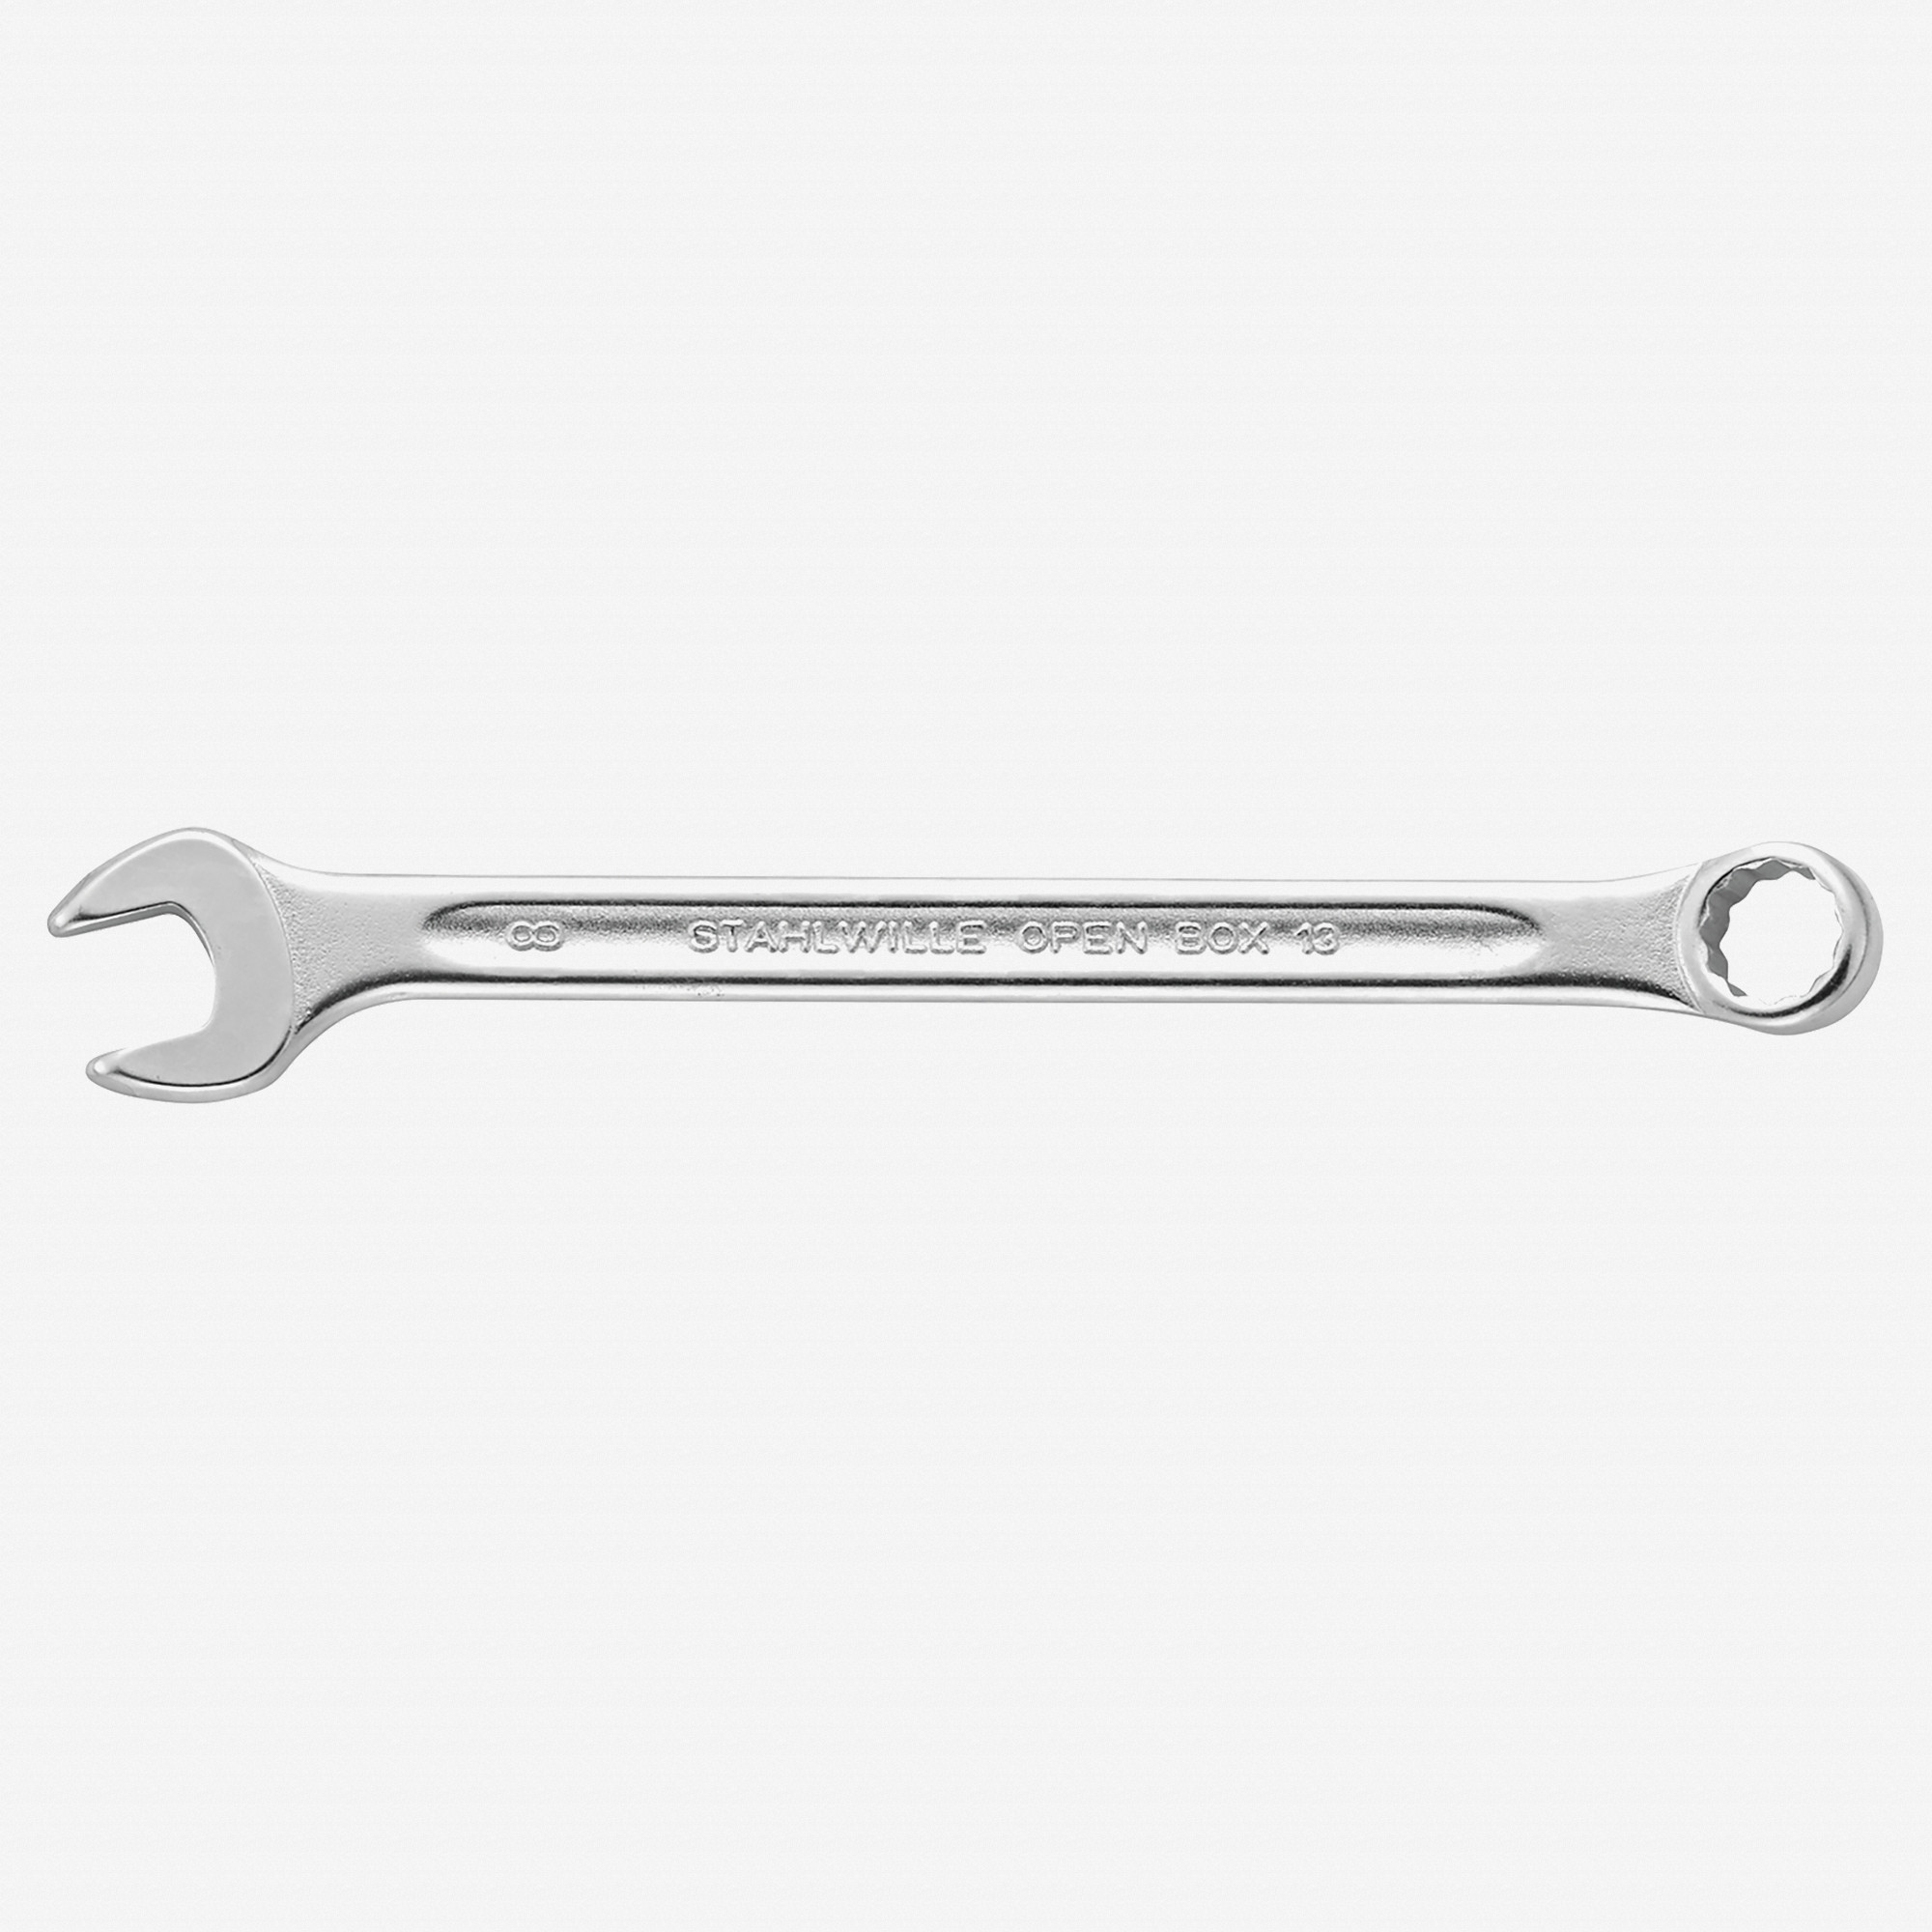 Stahlwille 13 Combination Spanner, 8 mm